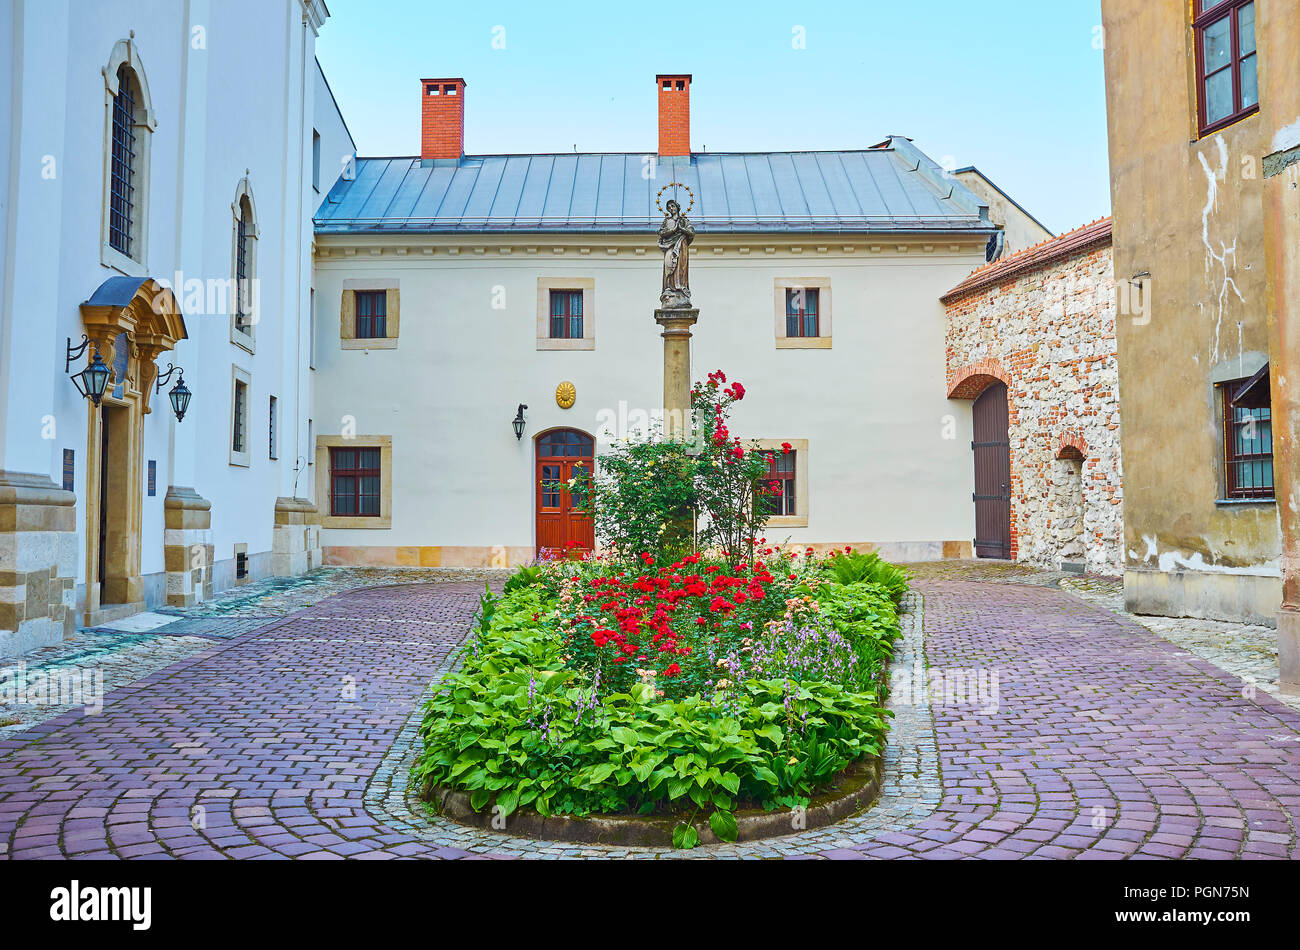 The view on the entrance to the Church on Grodek with beautiful flowerbed in the middle, Krakow, Poland Stock Photo